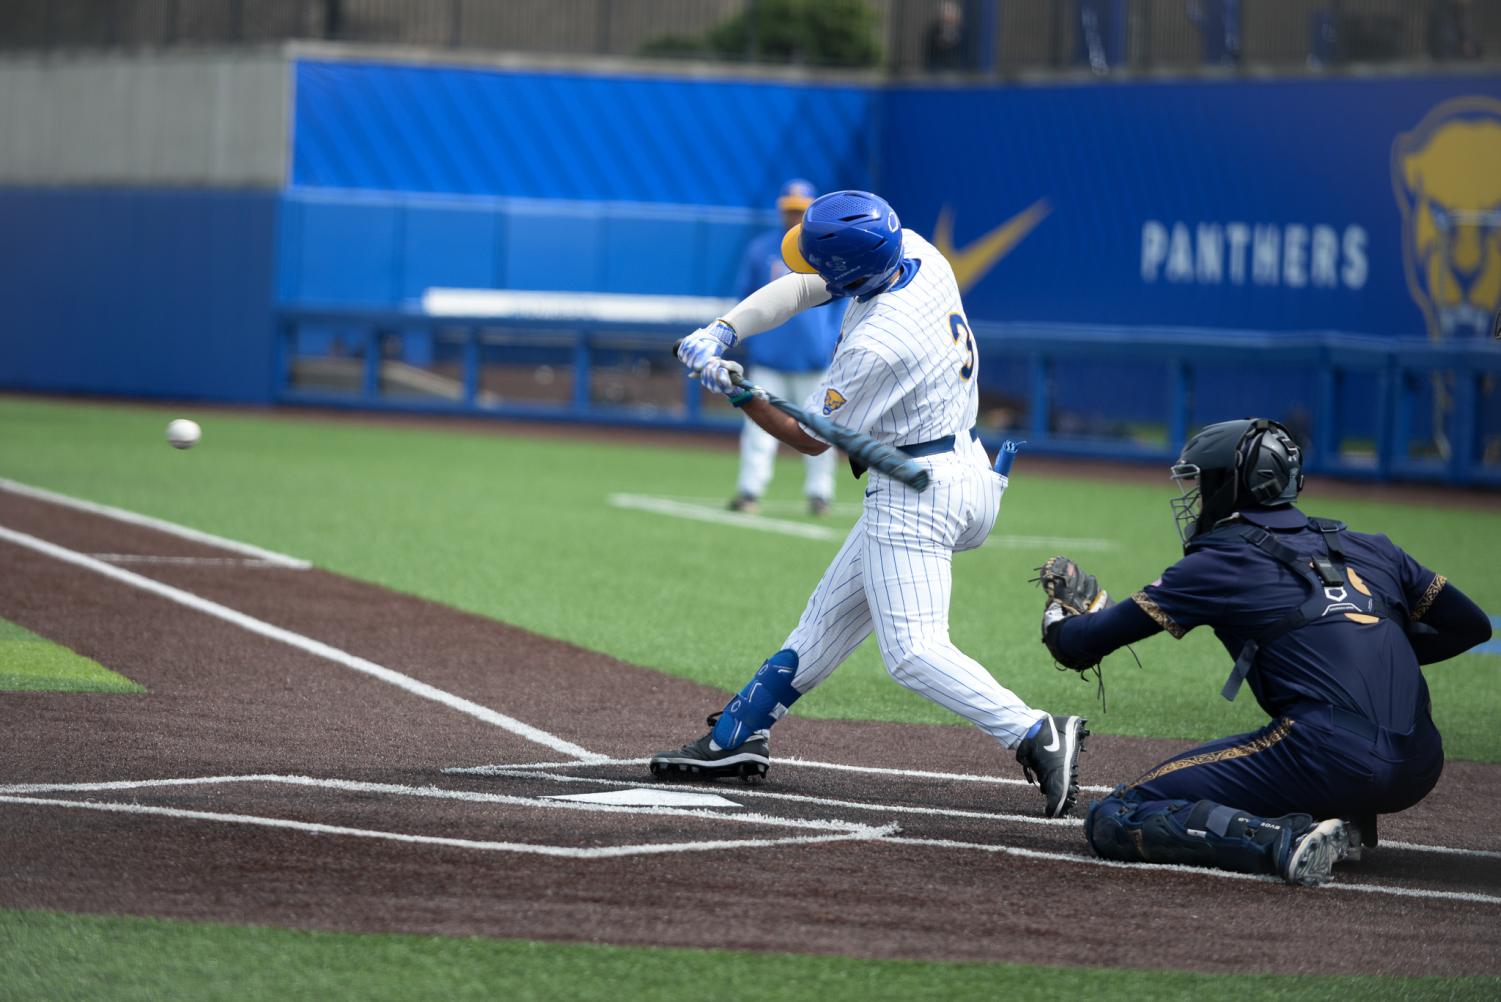 Jacks Fall to Youngstown 7-5 in Game One of Weekend Series